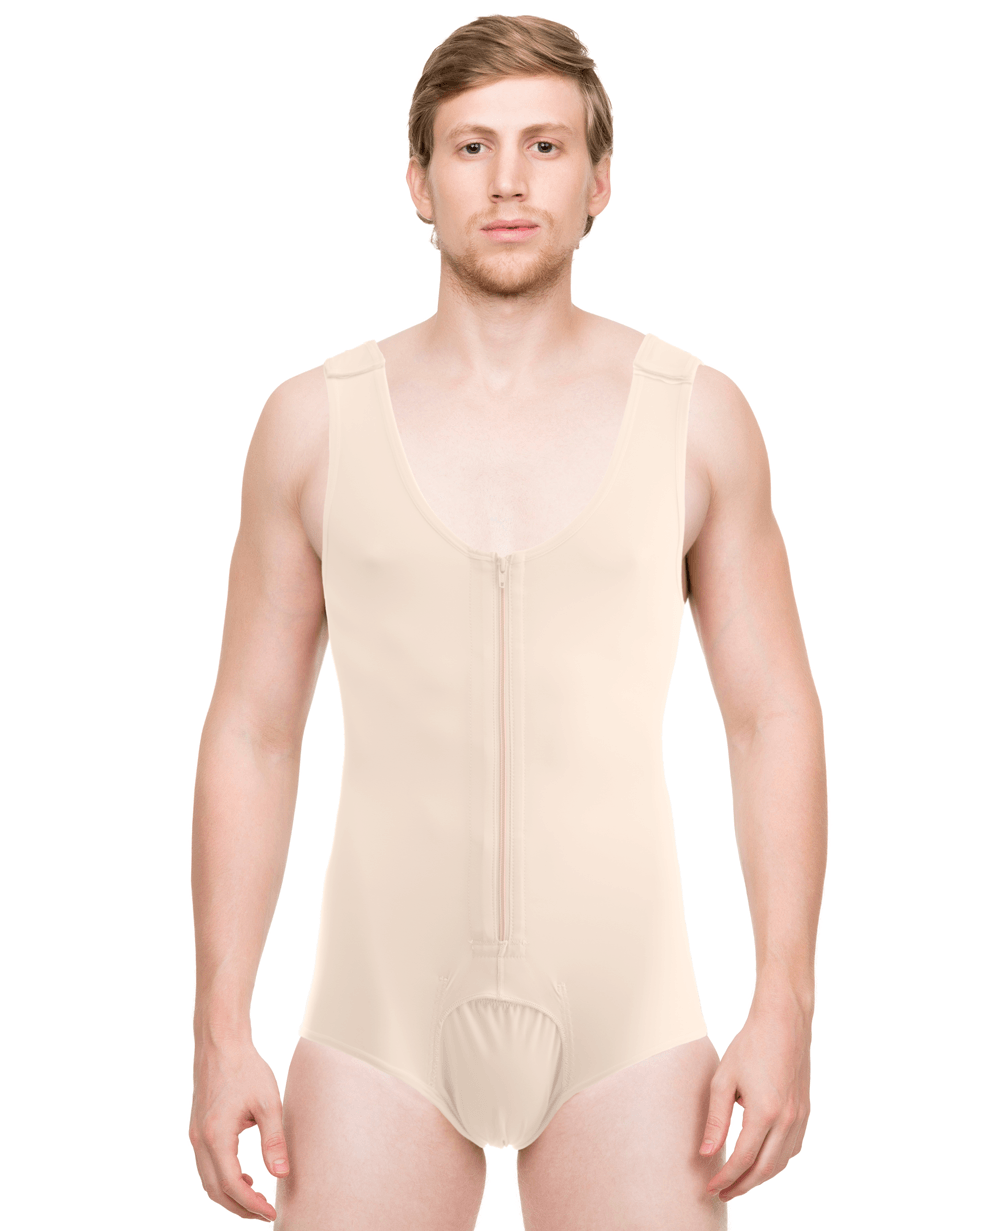 Male High-Waist Abdominal Cosmetic Surgery Compression Brief with Zipp